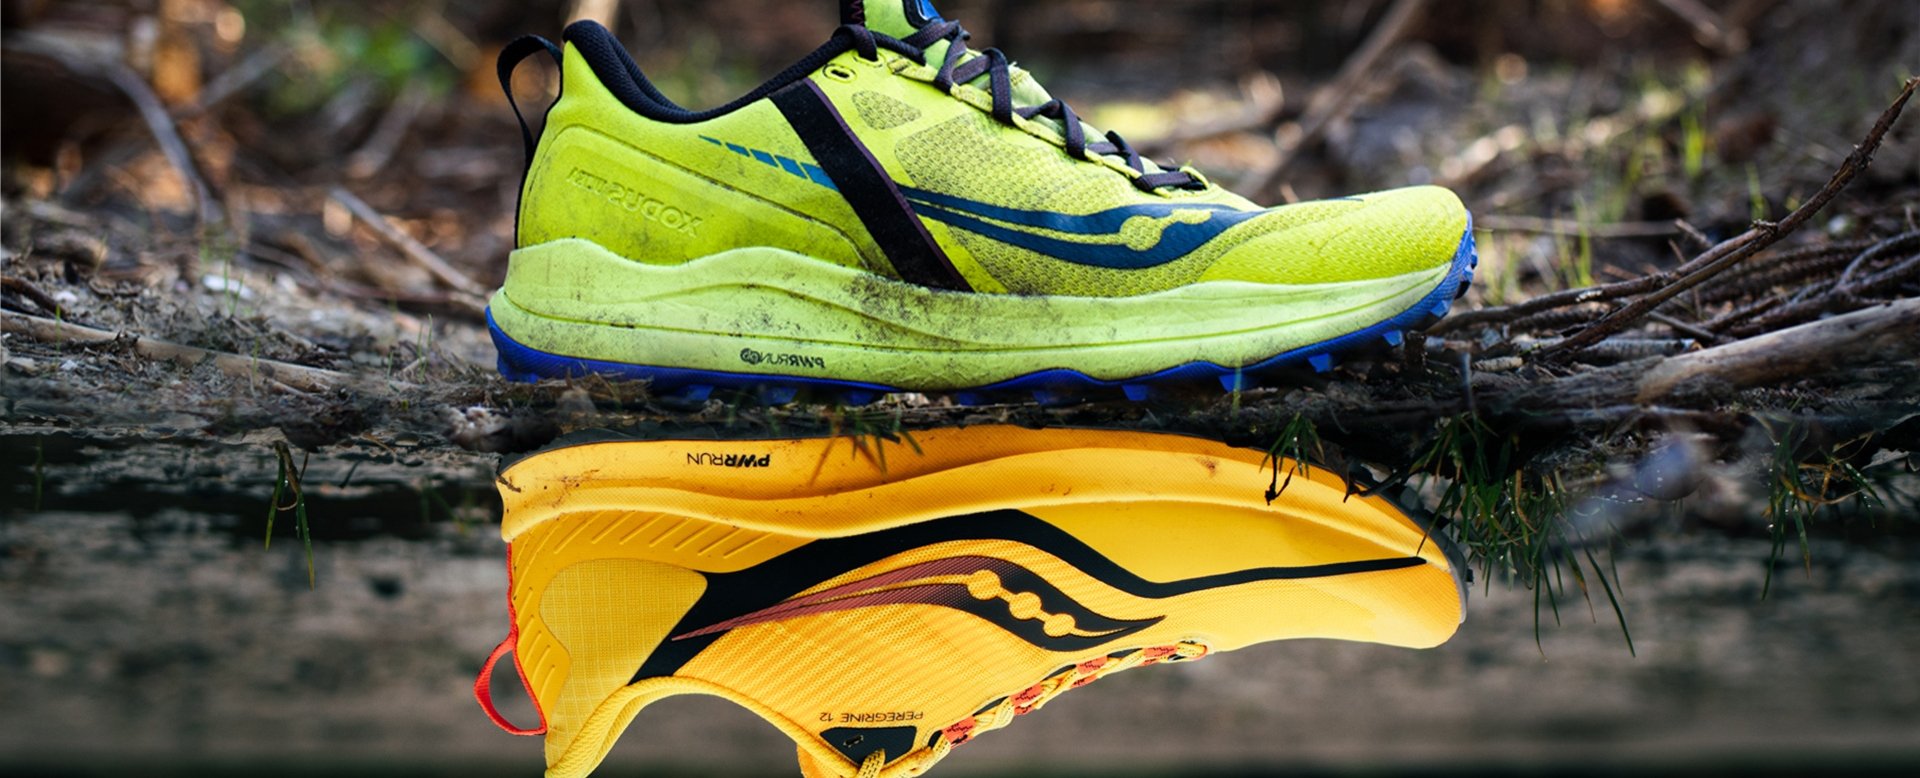 TEST: Saucony Xodus Ultra vs. Saucony Peregrine – See the differences -  Inspiration